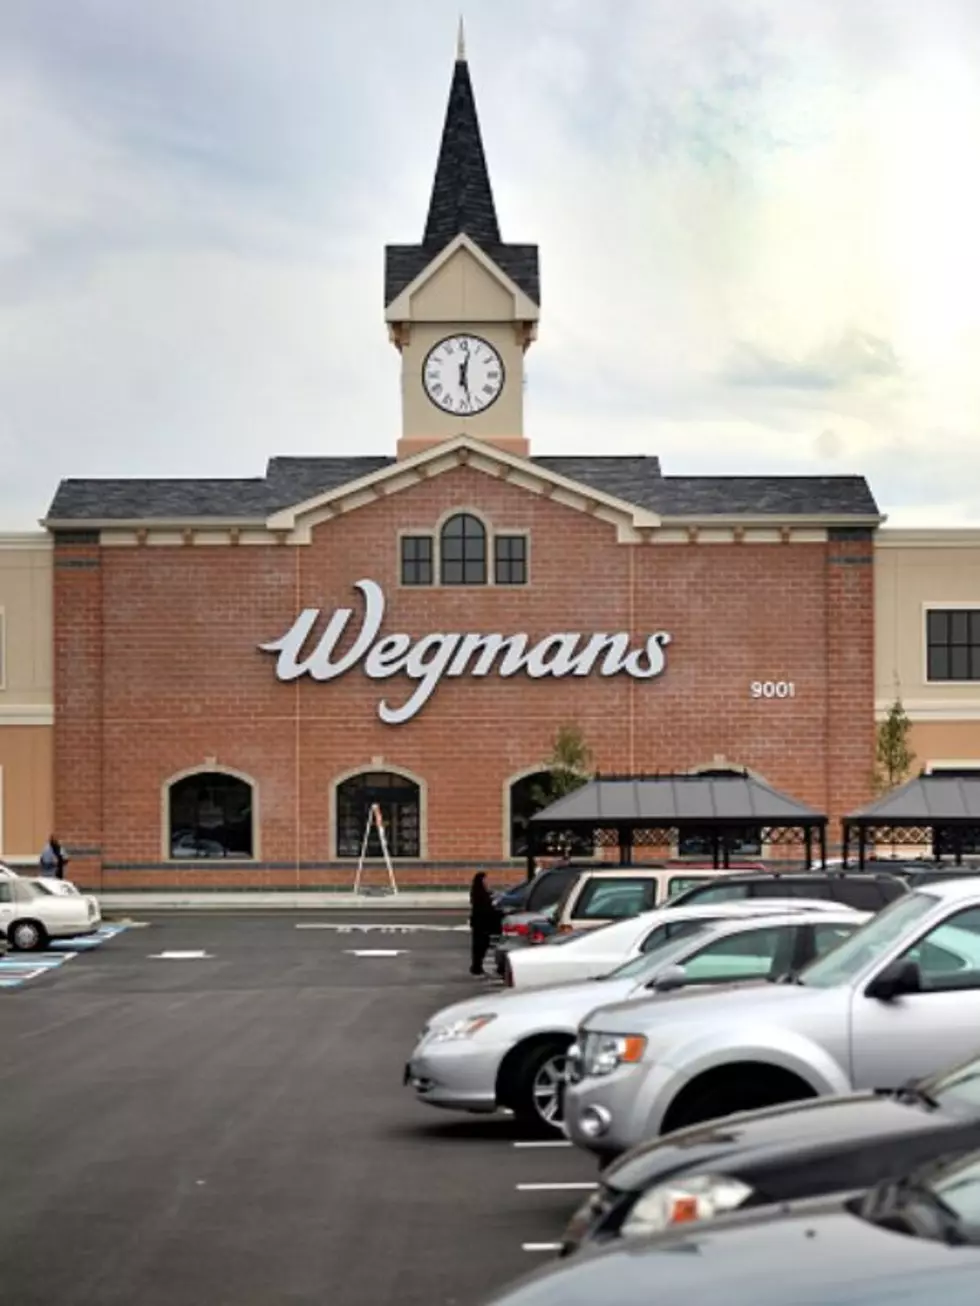 Free Cake At Wegmans This Weekend in WNY!